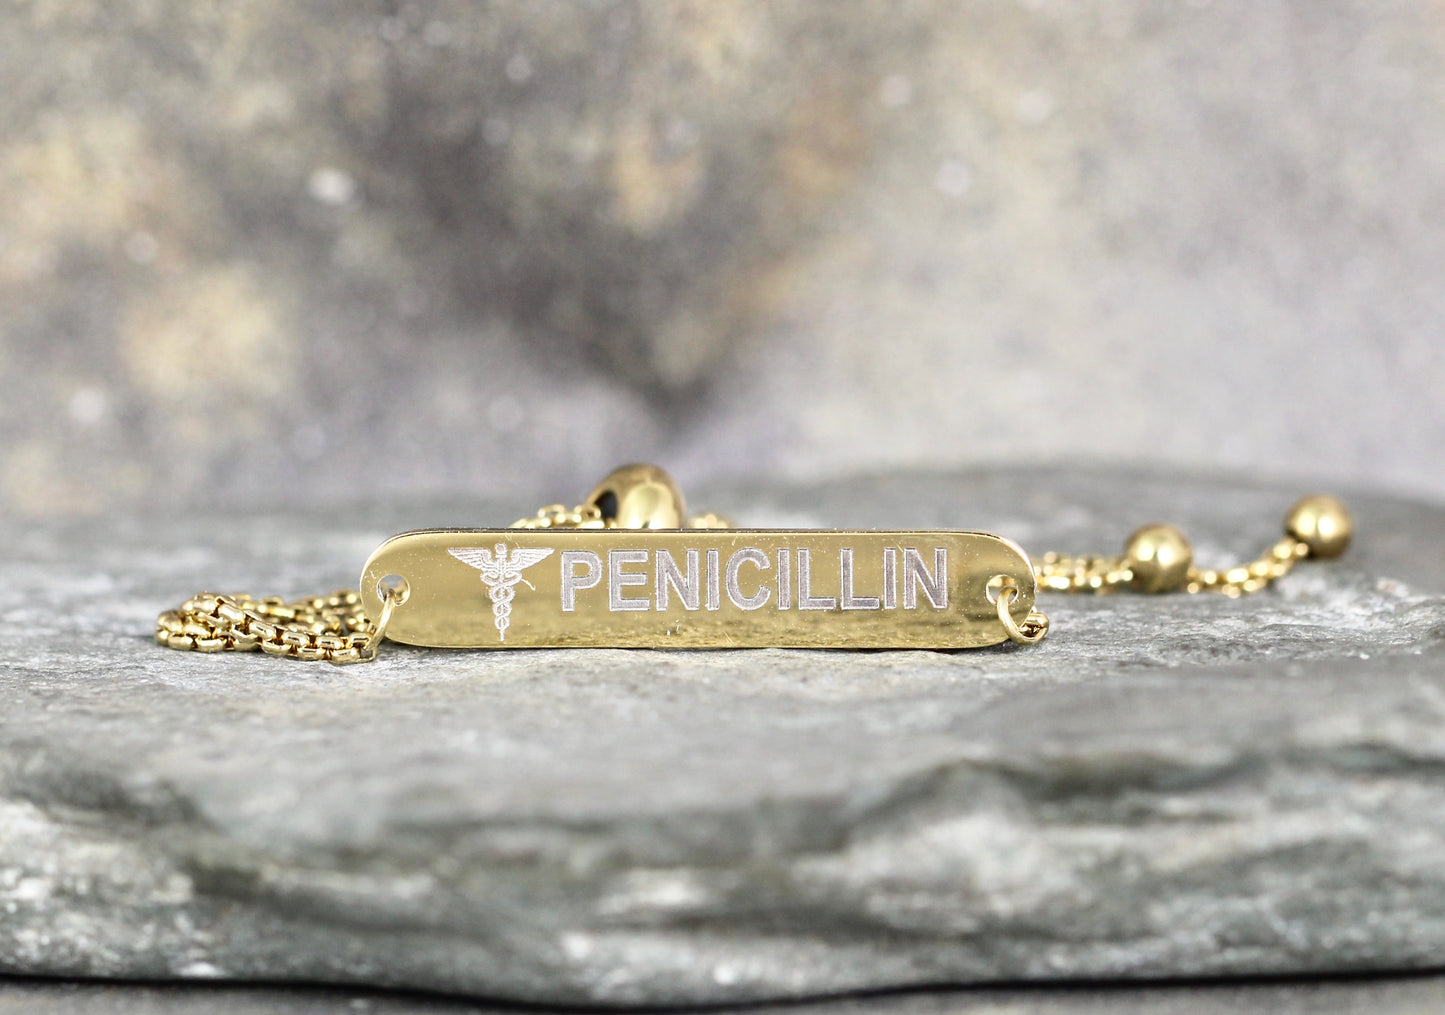 MEDICAL INFORMATION BRACELET - Stainless Steel in your choice of rose, yellow or steel - Engraved with your text